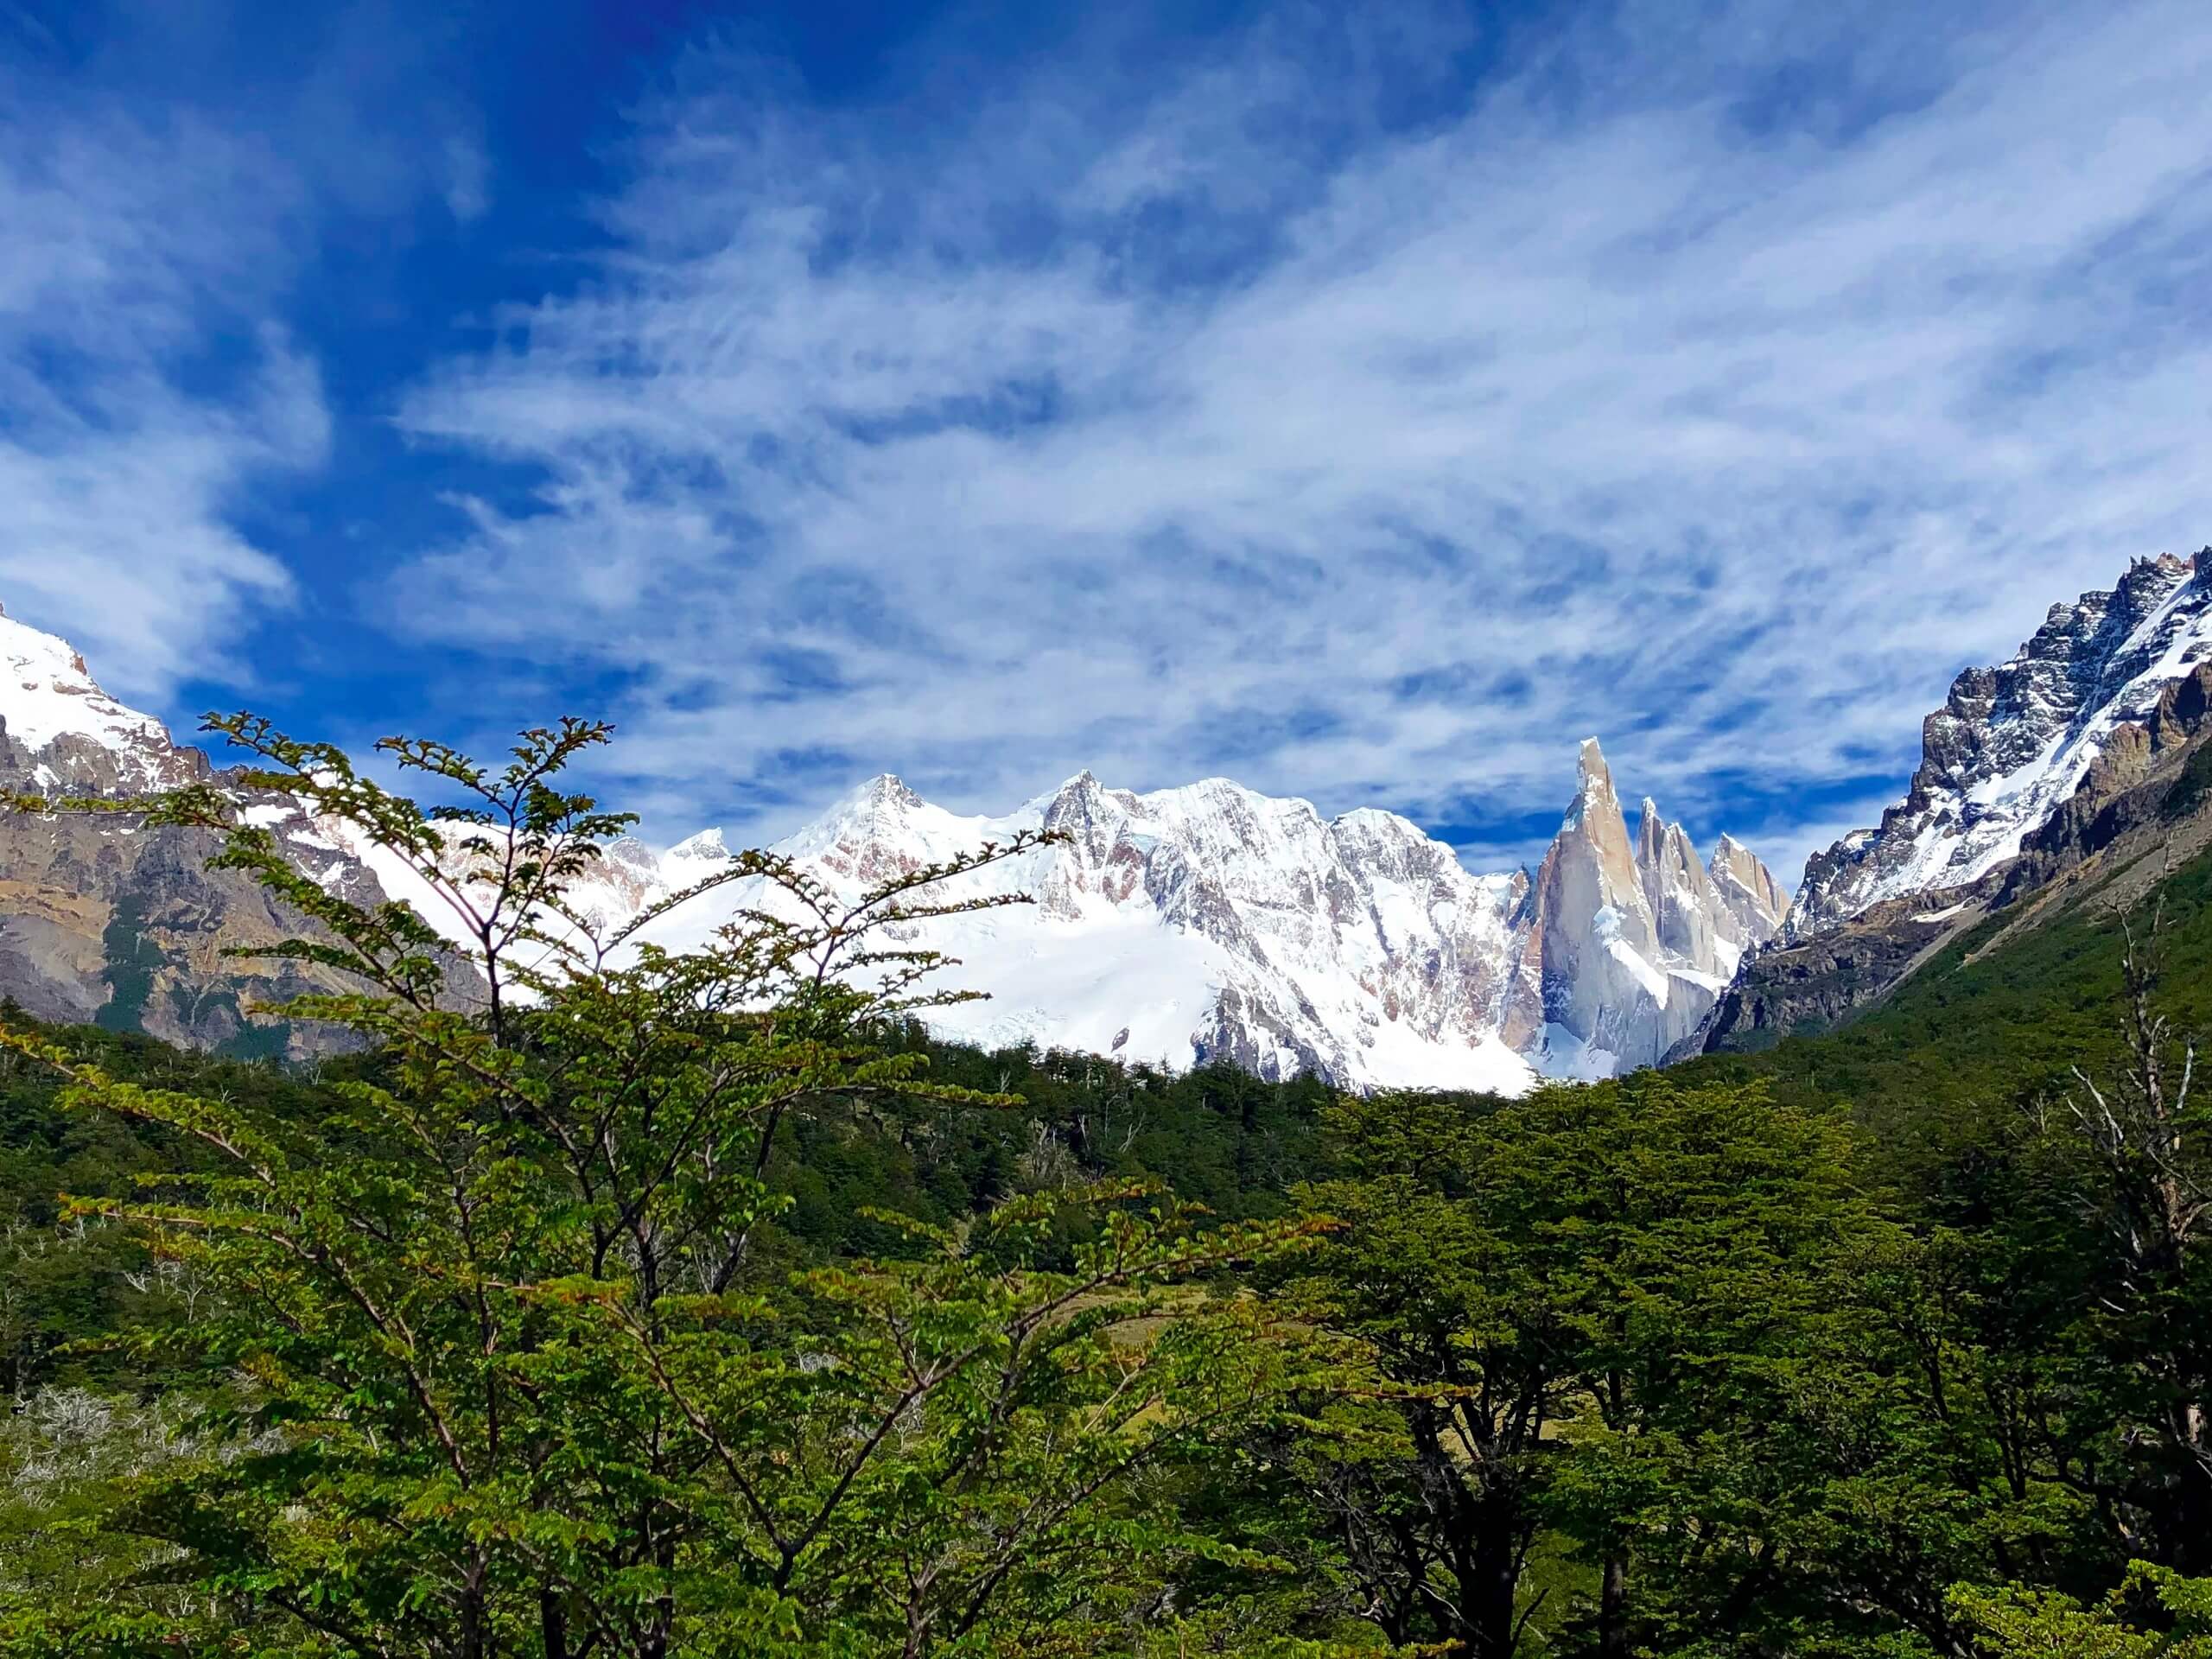 Approaching the snowy peaks of Patagonia while on guided tour